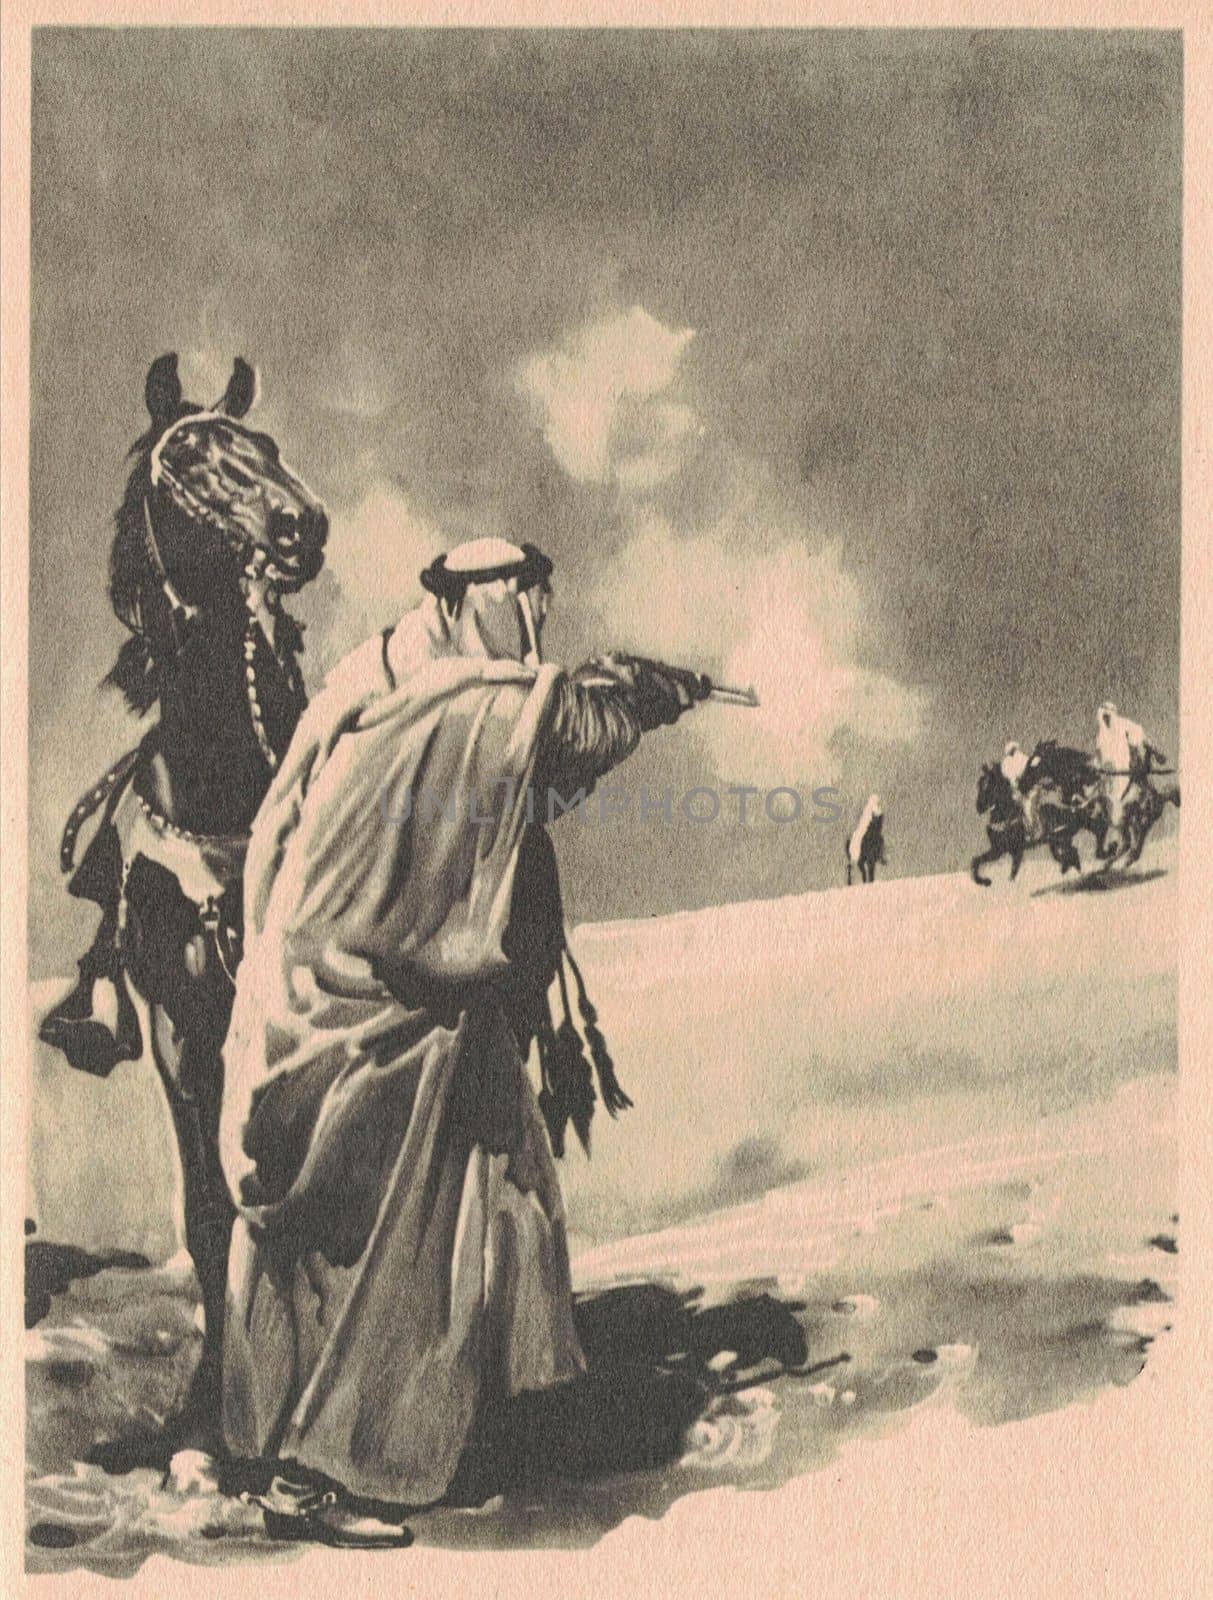 Black and white illustration shows an Arab shooting at other Arabs. Vintage black and white picture shows adventure life in the previous century.